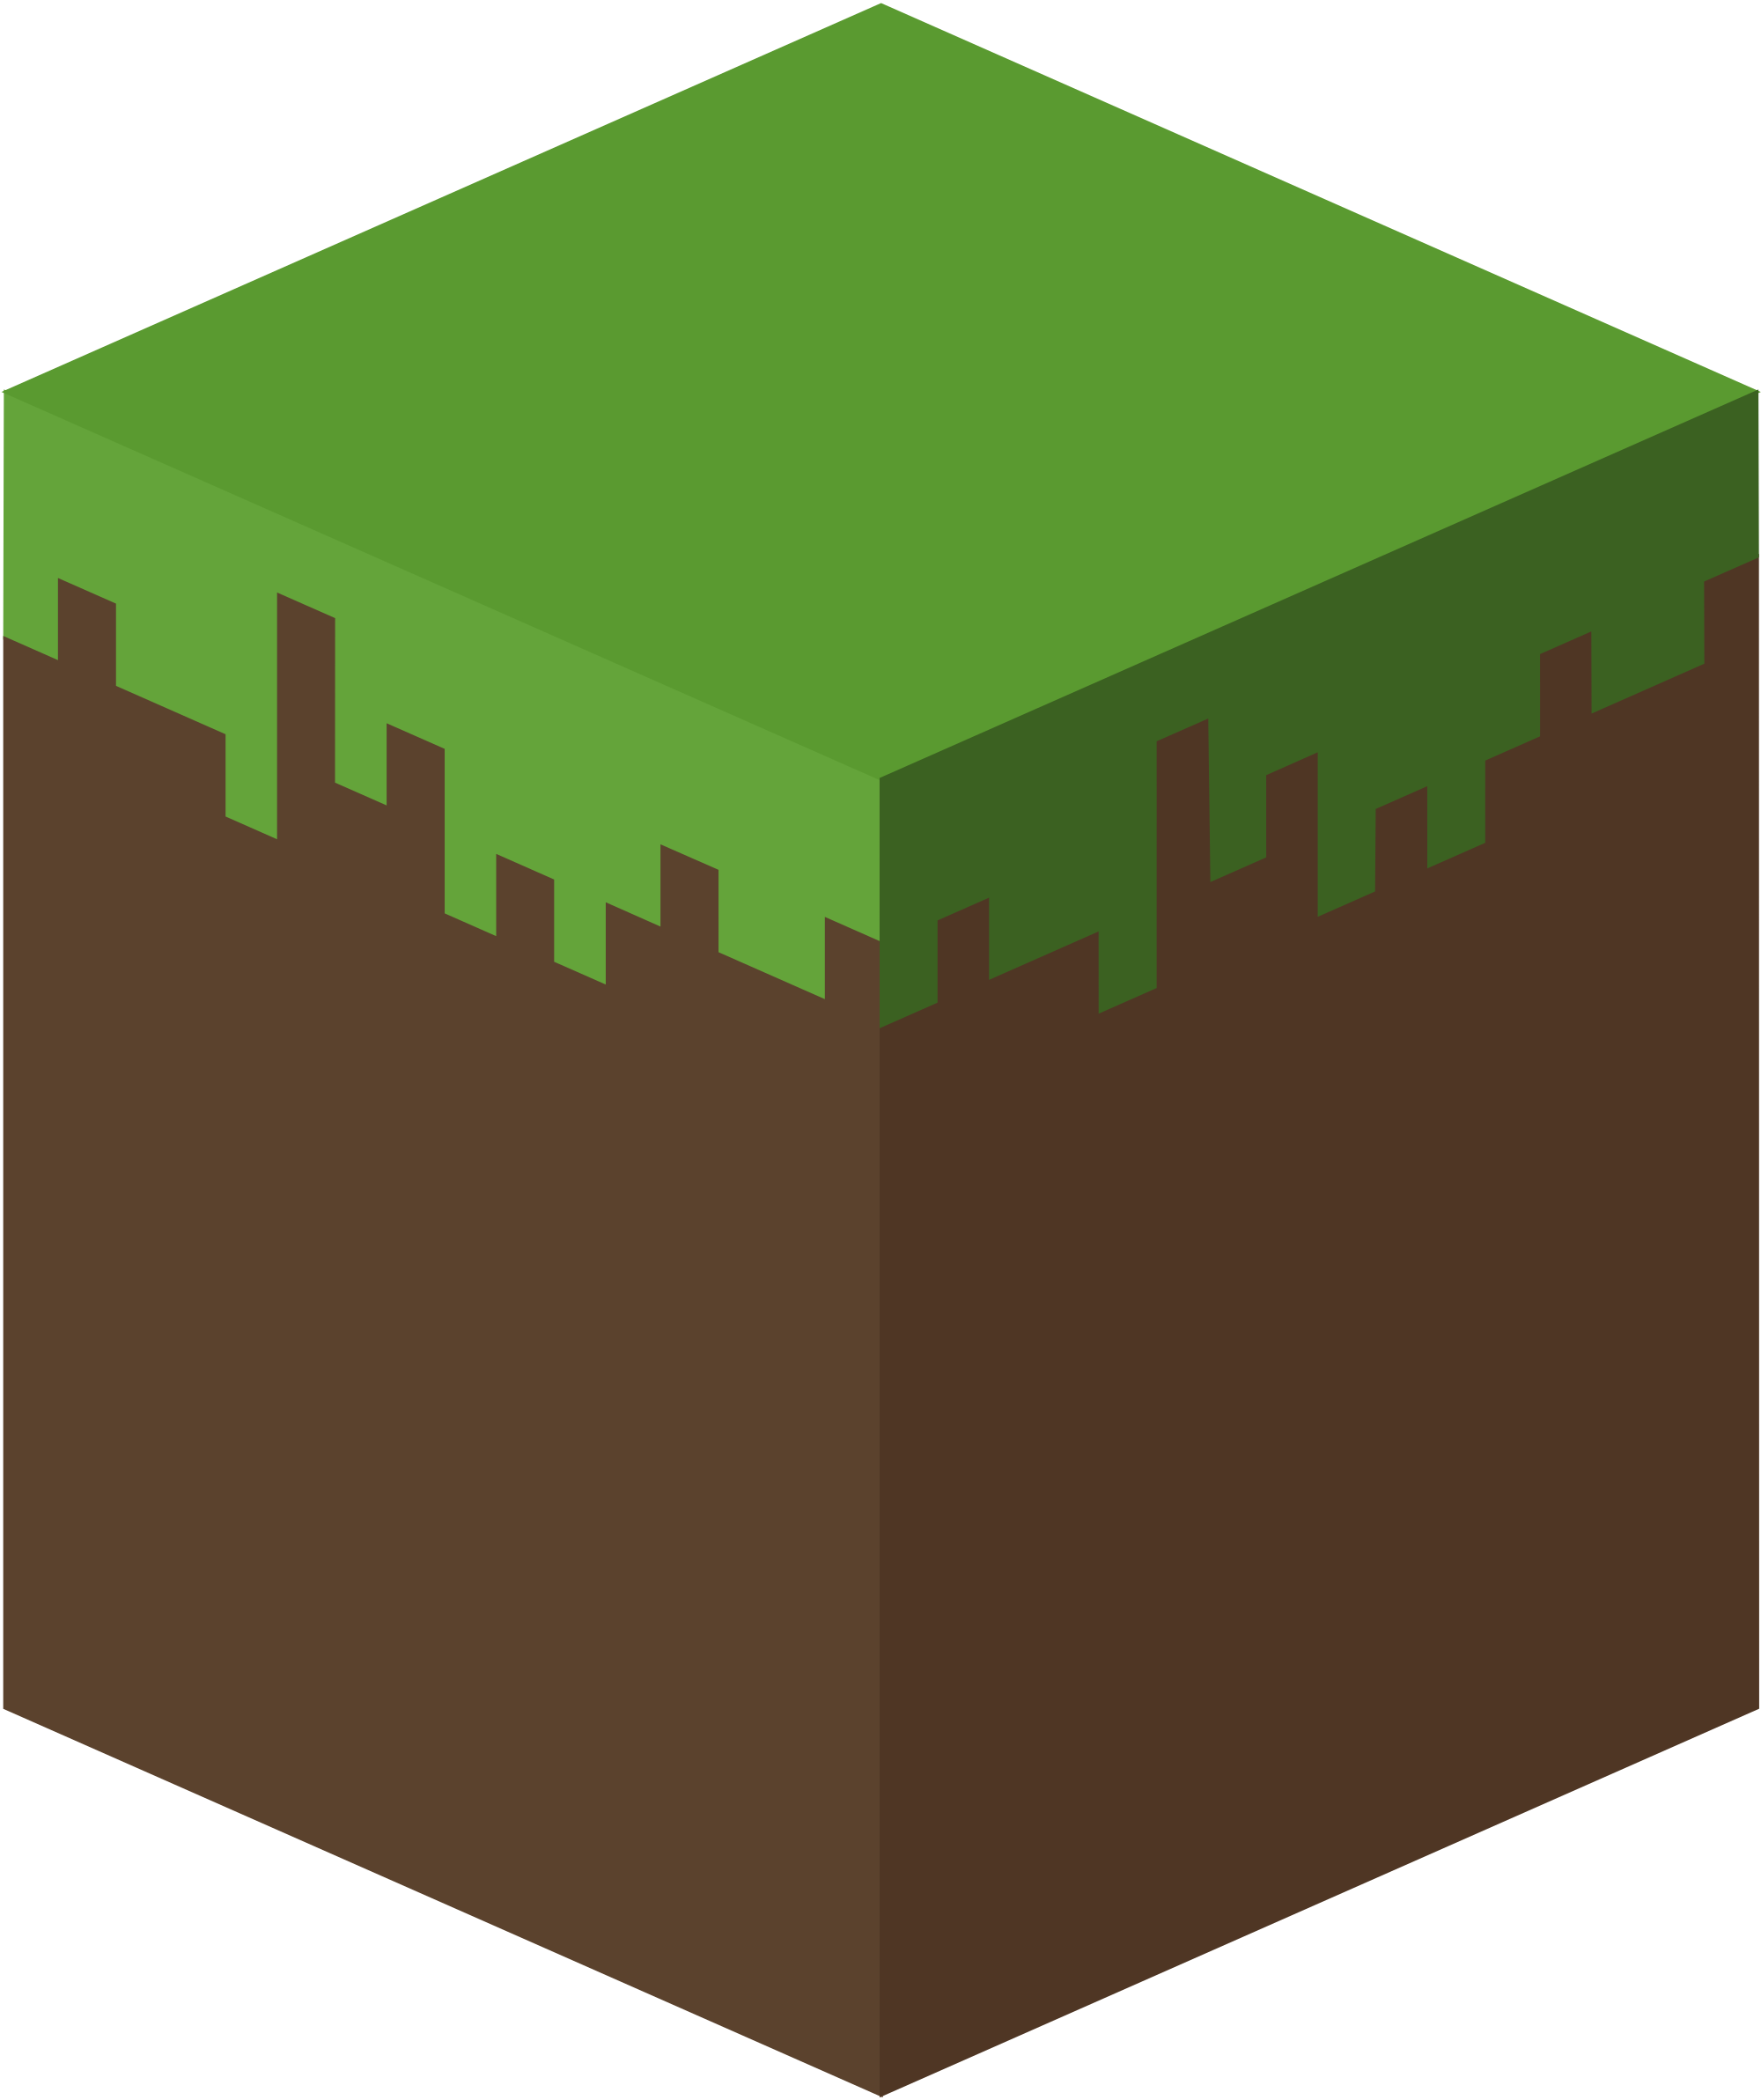 Minecraft PNG image free Download 